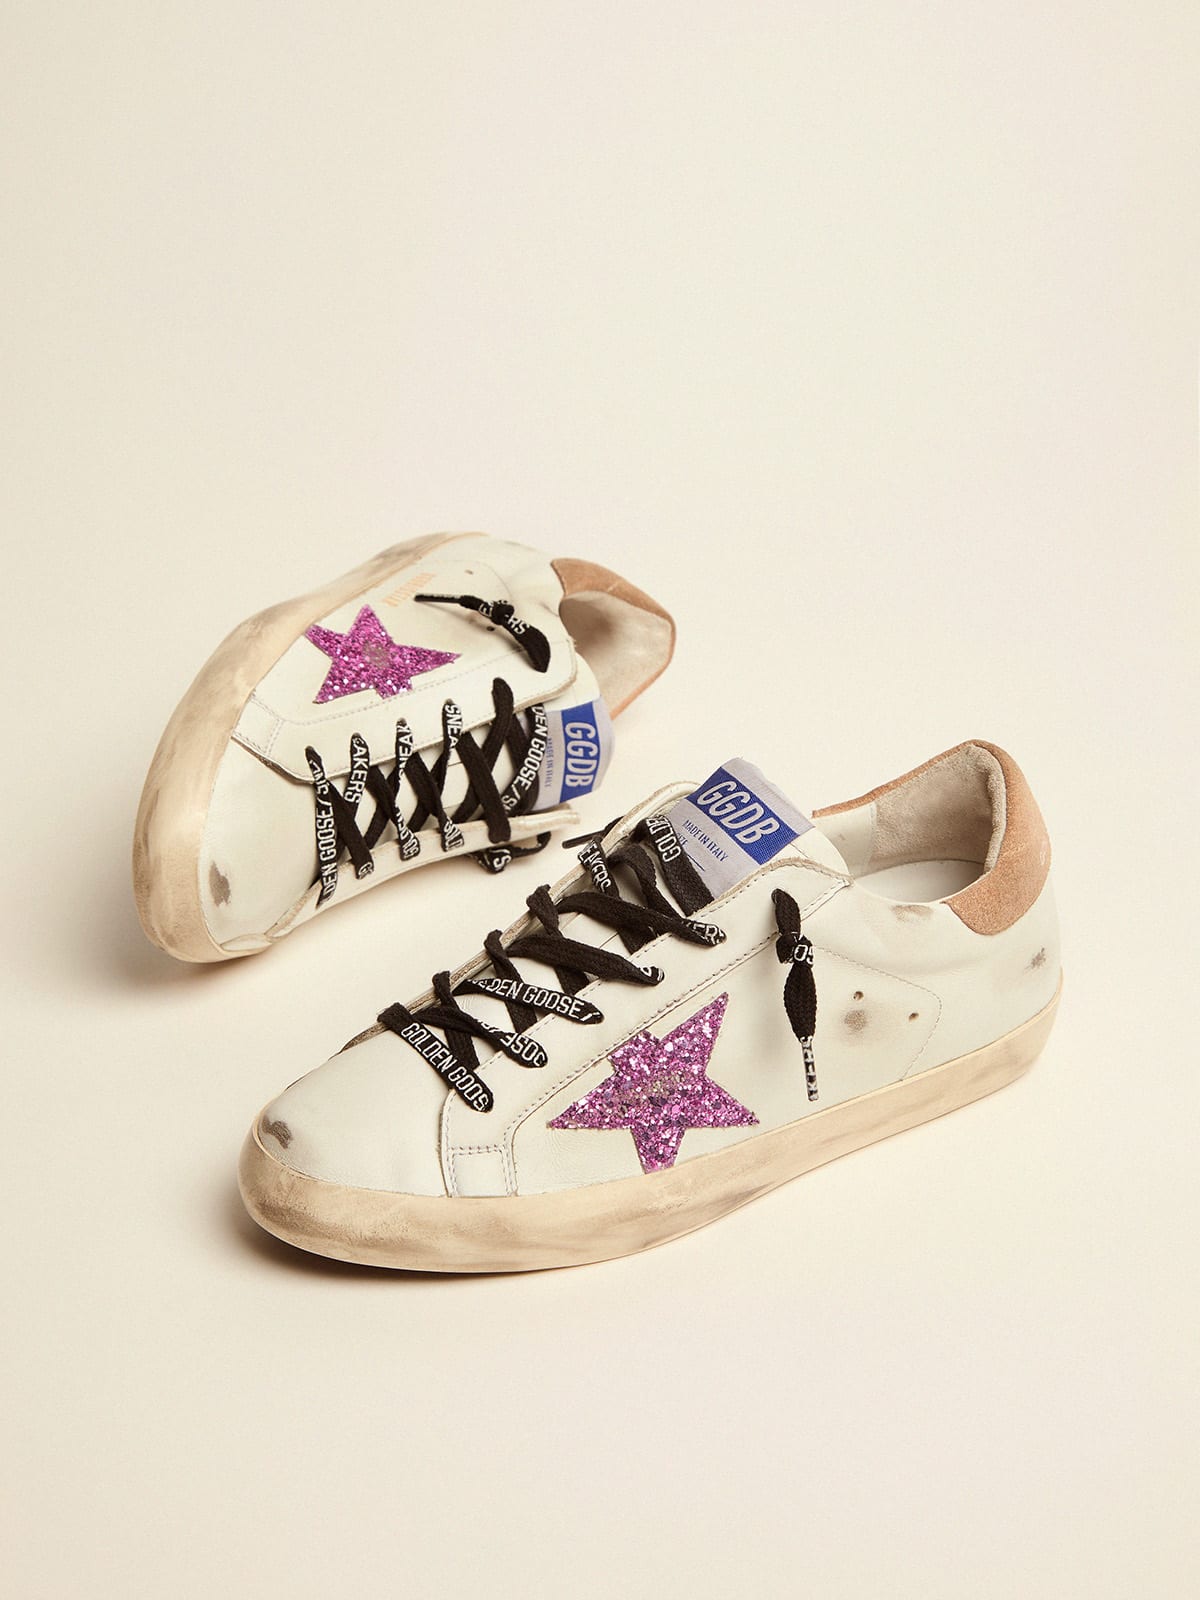 Super-Star sneakers in white leather with lavender-colored glitter star |  Golden Goose